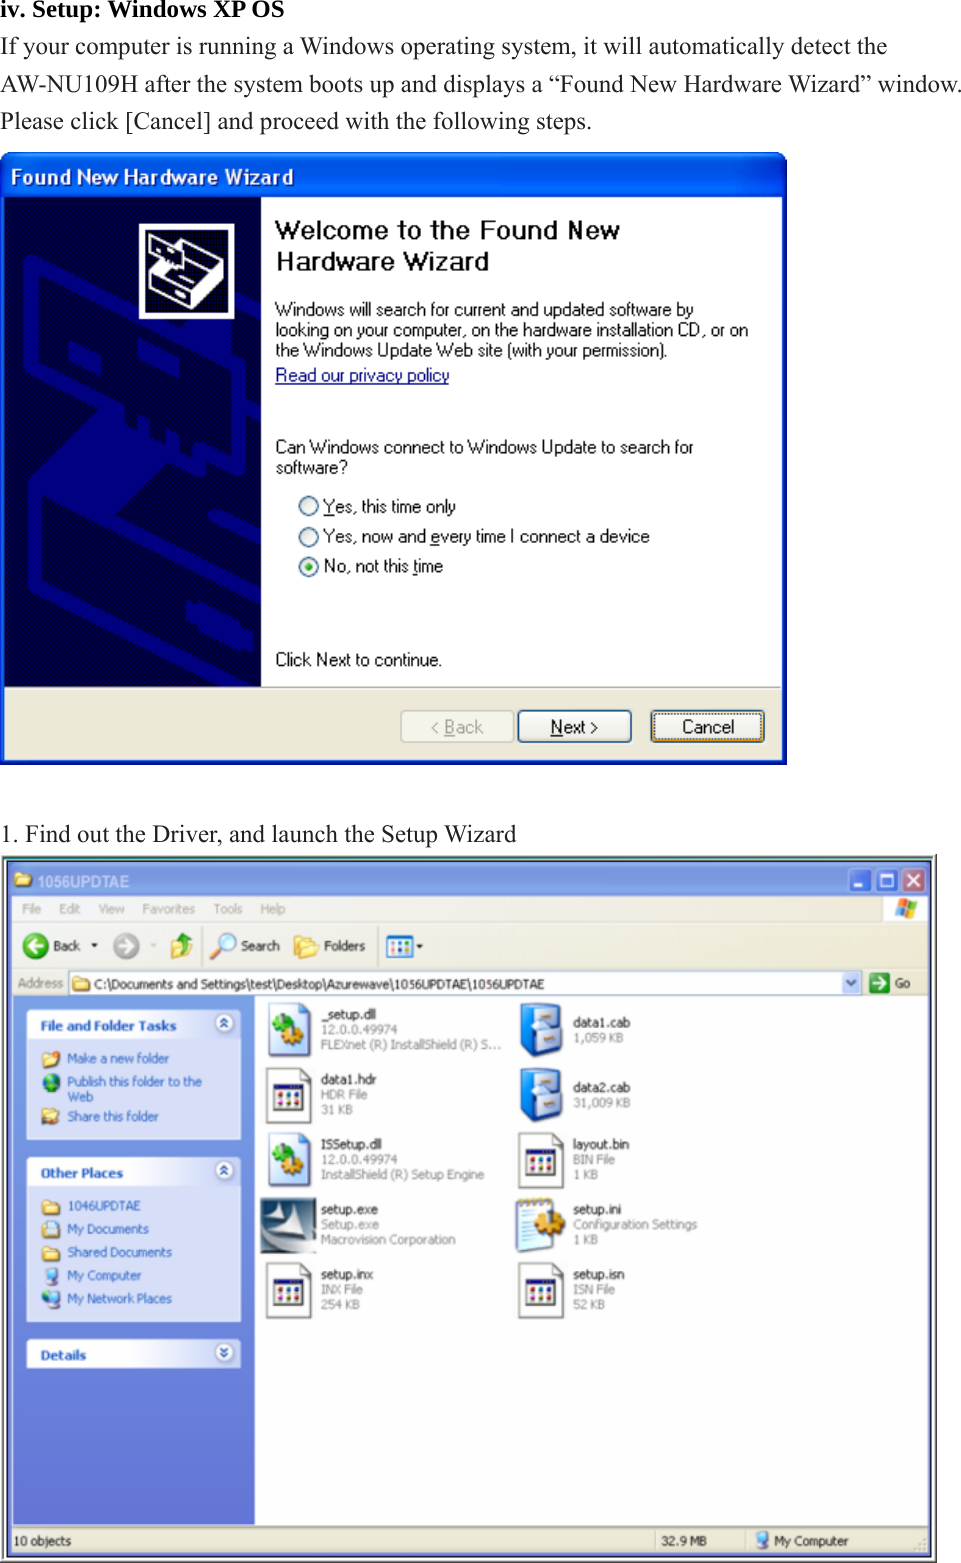 iv. Setup: Windows XP OS If your computer is running a Windows operating system, it will automatically detect the AW-NU109H after the system boots up and displays a “Found New Hardware Wizard” window. Please click [Cancel] and proceed with the following steps.   1. Find out the Driver, and launch the Setup Wizard  